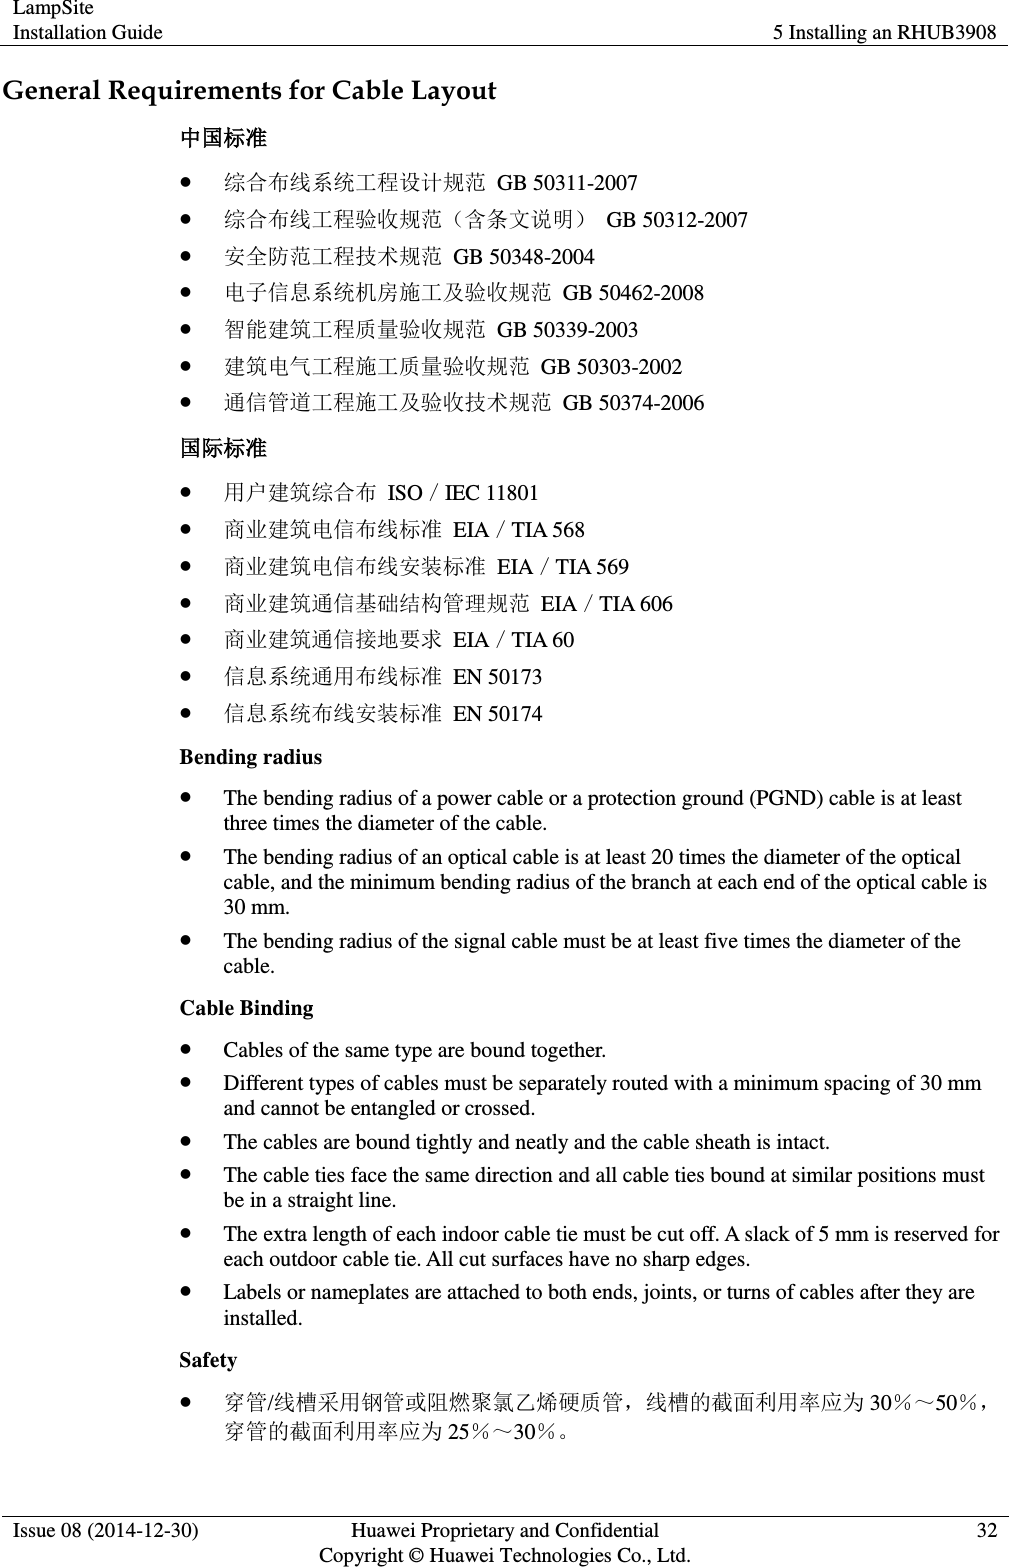 LampSite Installation Guide 5 Installing an RHUB3908  Issue 08 (2014-12-30) Huawei Proprietary and Confidential                                     Copyright © Huawei Technologies Co., Ltd. 32  General Requirements for Cable Layout 中国标准  综合布线系统工程设计规范  GB 50311-2007  综合布线工程验收规范（含条文说明）  GB 50312-2007  安全防范工程技术规范  GB 50348-2004  电子信息系统机房施工及验收规范  GB 50462-2008  智能建筑工程质量验收规范  GB 50339-2003  建筑电气工程施工质量验收规范  GB 50303-2002  通信管道工程施工及验收技术规范  GB 50374-2006 国际标准  用户建筑综合布  ISO／IEC 11801  商业建筑电信布线标准  EIA／TIA 568  商业建筑电信布线安装标准  EIA／TIA 569  商业建筑通信基础结构管理规范  EIA／TIA 606  商业建筑通信接地要求  EIA／TIA 60  信息系统通用布线标准  EN 50173  信息系统布线安装标准  EN 50174 Bending radius  The bending radius of a power cable or a protection ground (PGND) cable is at least three times the diameter of the cable.  The bending radius of an optical cable is at least 20 times the diameter of the optical cable, and the minimum bending radius of the branch at each end of the optical cable is 30 mm.  The bending radius of the signal cable must be at least five times the diameter of the cable. Cable Binding  Cables of the same type are bound together.  Different types of cables must be separately routed with a minimum spacing of 30 mm and cannot be entangled or crossed.  The cables are bound tightly and neatly and the cable sheath is intact.  The cable ties face the same direction and all cable ties bound at similar positions must be in a straight line.  The extra length of each indoor cable tie must be cut off. A slack of 5 mm is reserved for each outdoor cable tie. All cut surfaces have no sharp edges.  Labels or nameplates are attached to both ends, joints, or turns of cables after they are installed. Safety  穿管/线槽采用钢管或阻燃聚氯乙烯硬质管，线槽的截面利用率应为 30％～50％，穿管的截面利用率应为 25％～30％。 